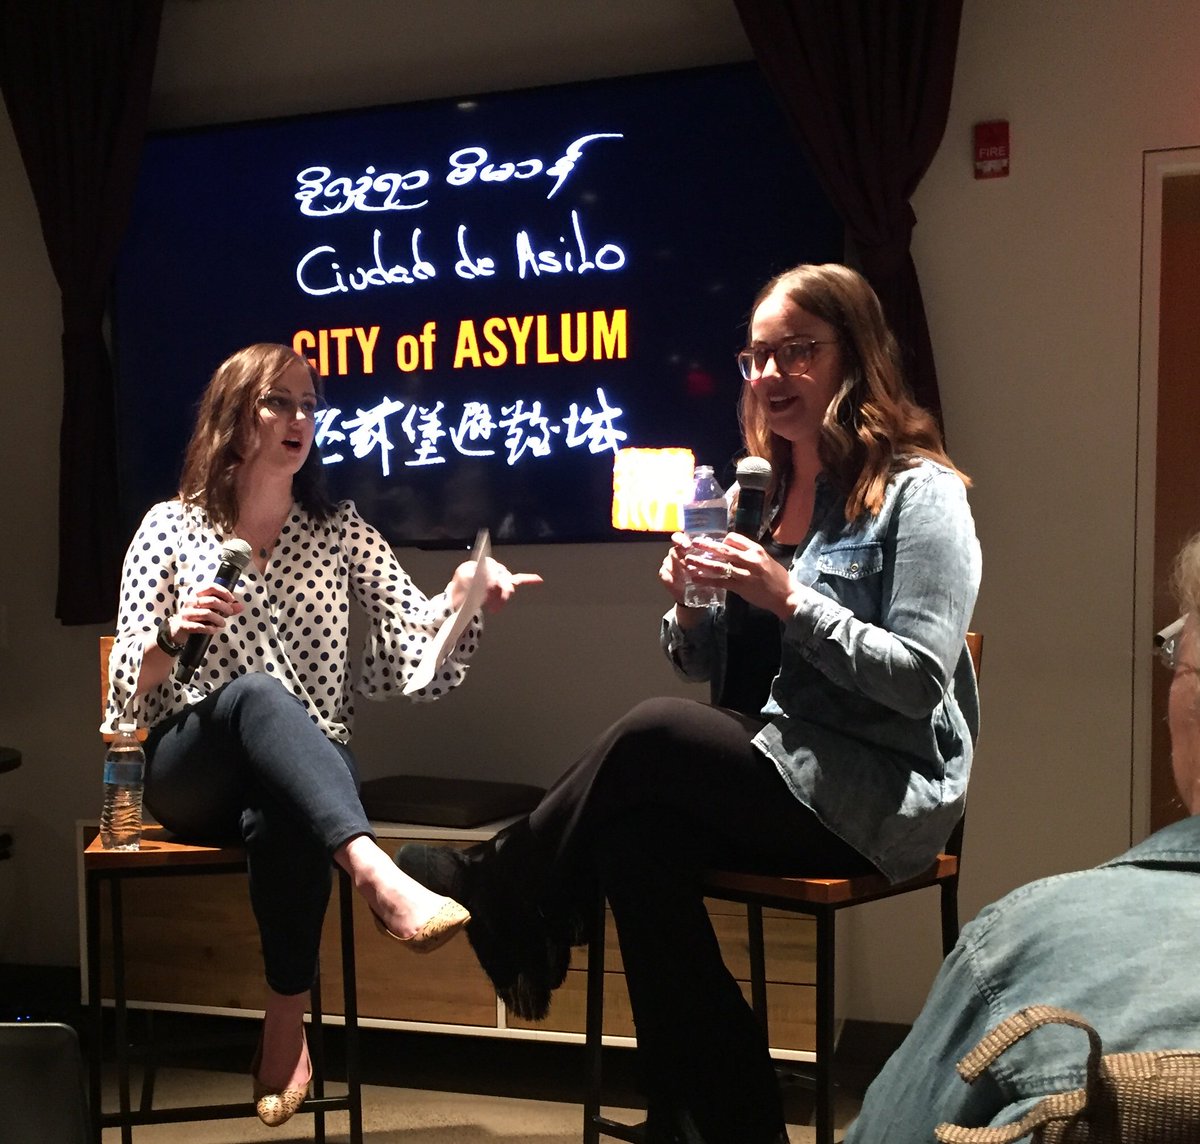 Great talk by  Jordan Corcoran ( Write It Out, @ListenLucy ) author who shared her battle with mental illness at @cityofasylum with @NAMIKeystonePA 
#mentalhealth #littsburgh #pennwriters #mentalillness #StoriesThatHeal @FamilyGuideToMH